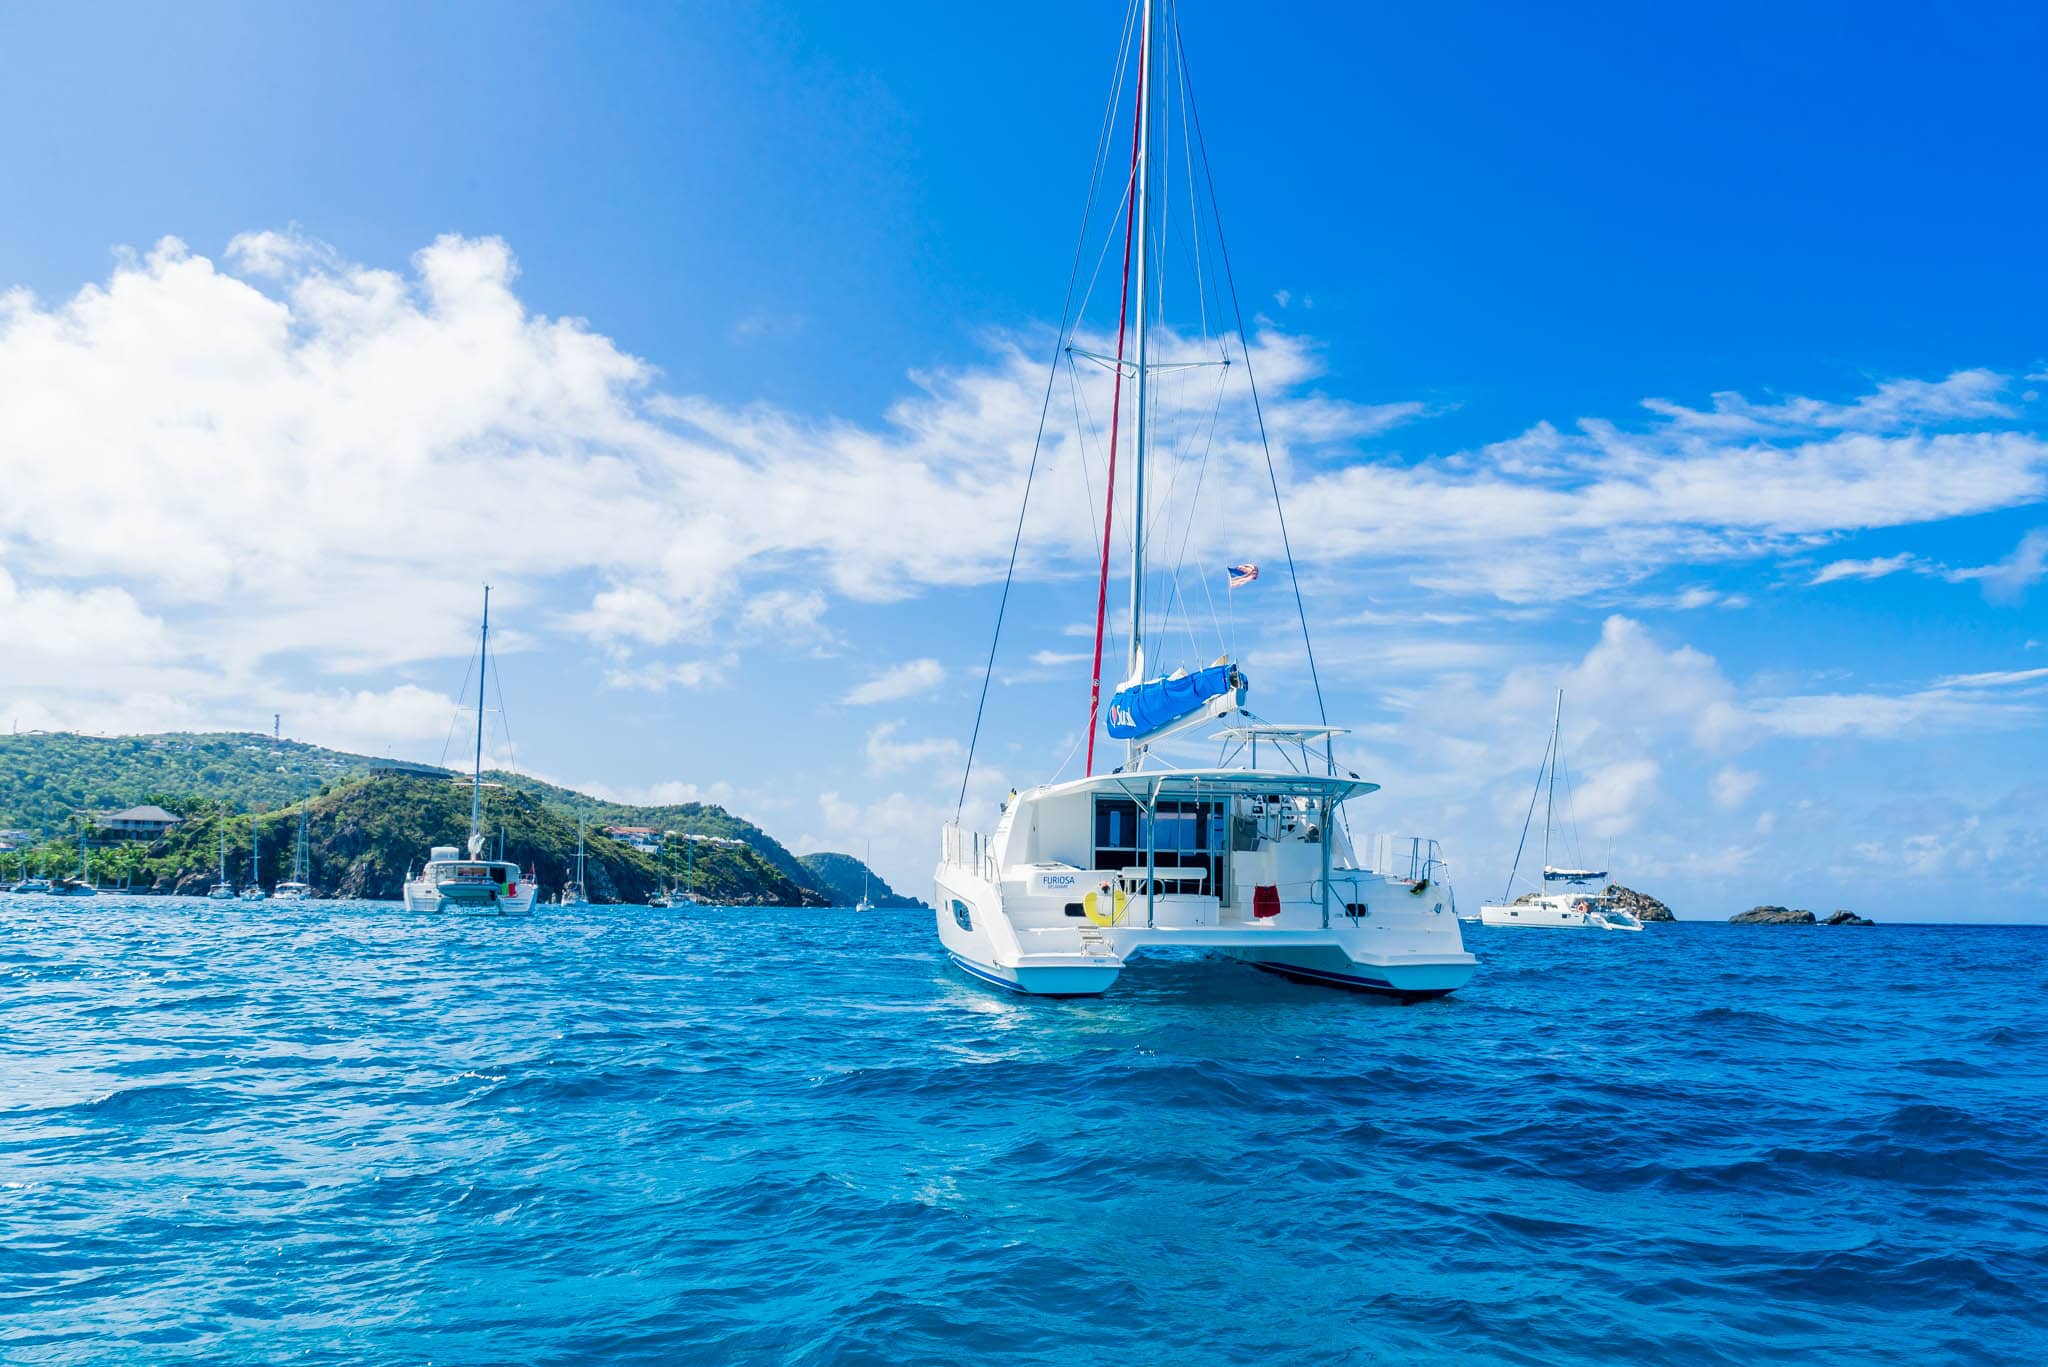 Anchored off St. Barths by Patrick Bennett